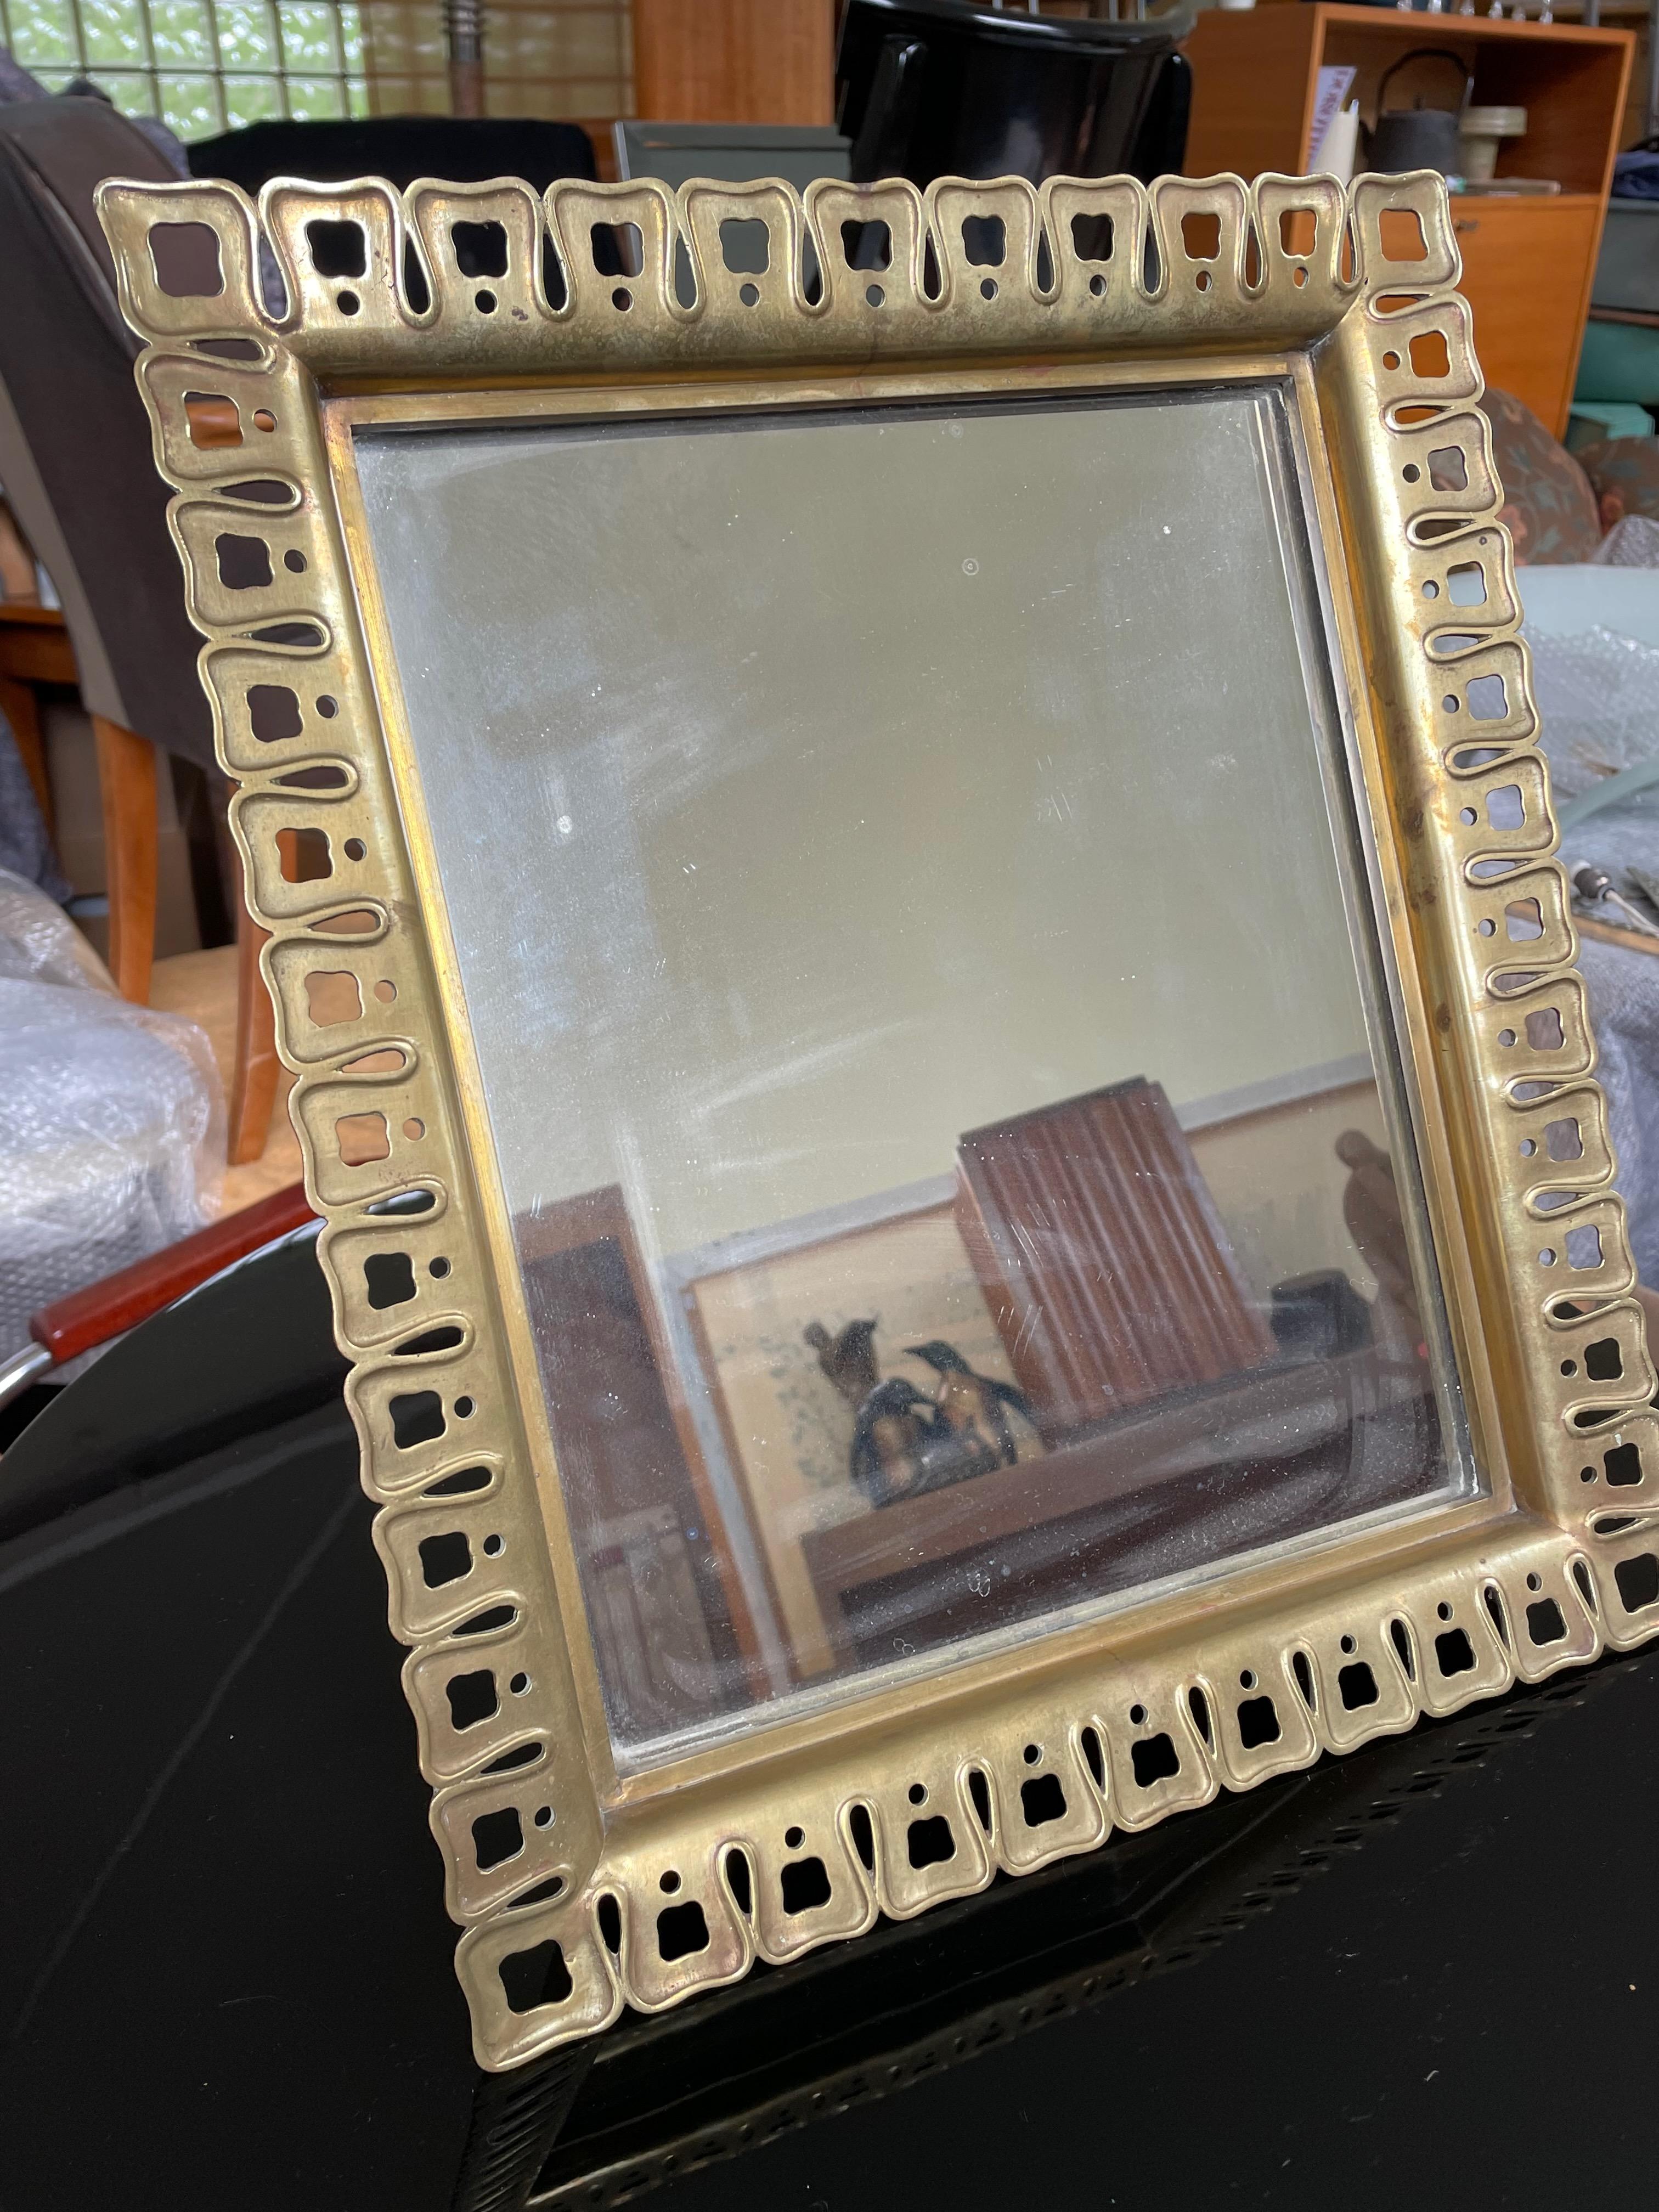 Rectangular table mirror. Italy.
Probably  from the forties/ fifties.
Mid century design.
Brutalist style.
Very heavy solid quality of the massive brass frame.
The mirror is reminiscent of works by Luciano Frigerio.